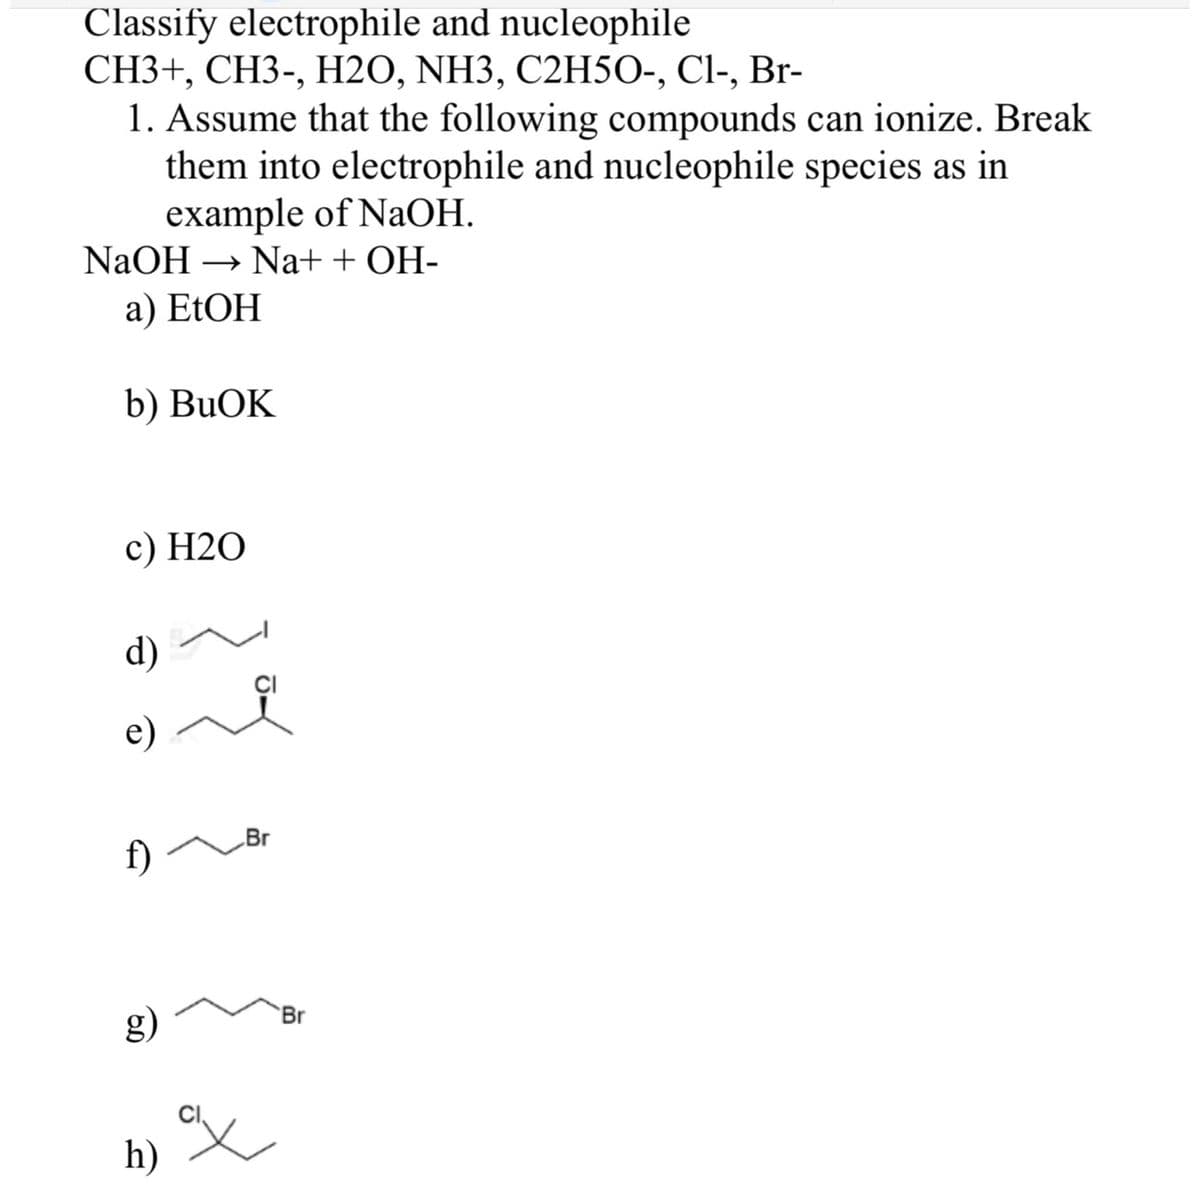 Classify electrophile and nucleophile
CH3+, CH3-, H2O, NH3, C2H5O-, Cl-, Br-
1. Assume that the following compounds can ionize. Break
them into electrophile and nucleophile species as in
example of NaOH.
NaOH → Na+ + OH-
a) EtOH
b) BuOK
c) H2O
1) -
d)
e)
f)
g)
h)
Br
%X
Br